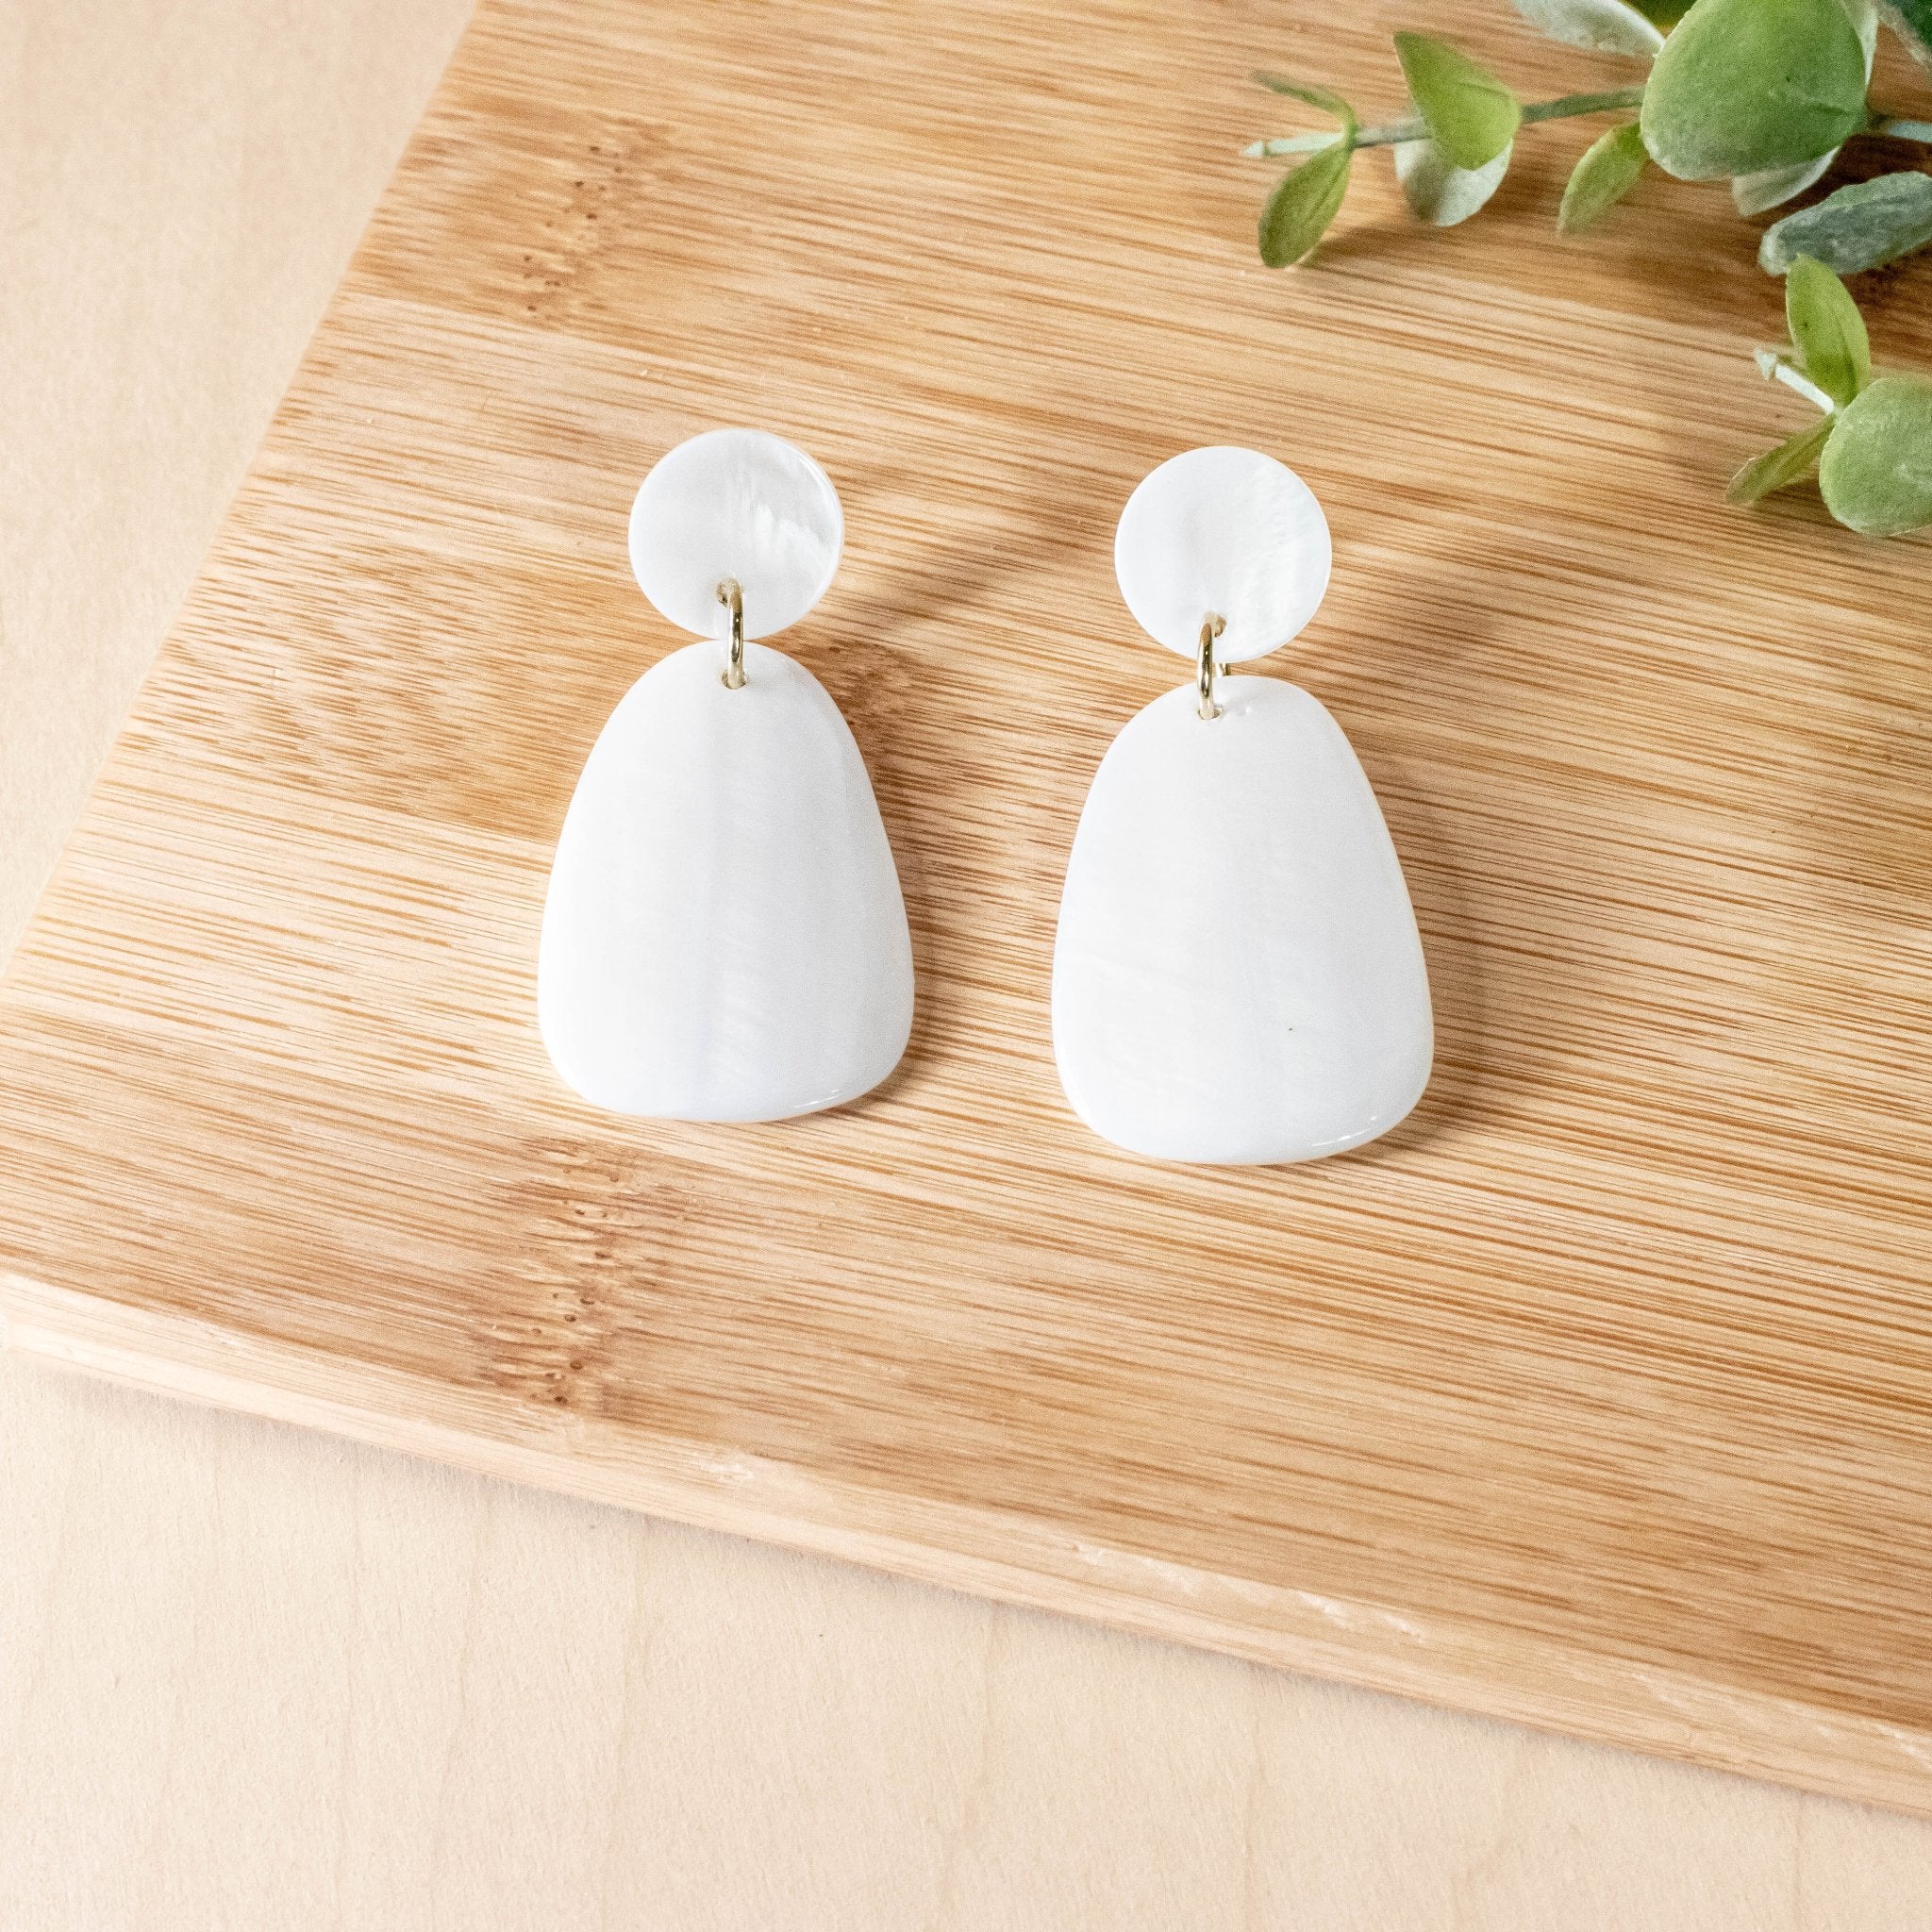 Earrings, Jewelry - Pearl White Mother of Pearl Earrings - Geometric Earrings | LIKHÂ - LIKHÂ